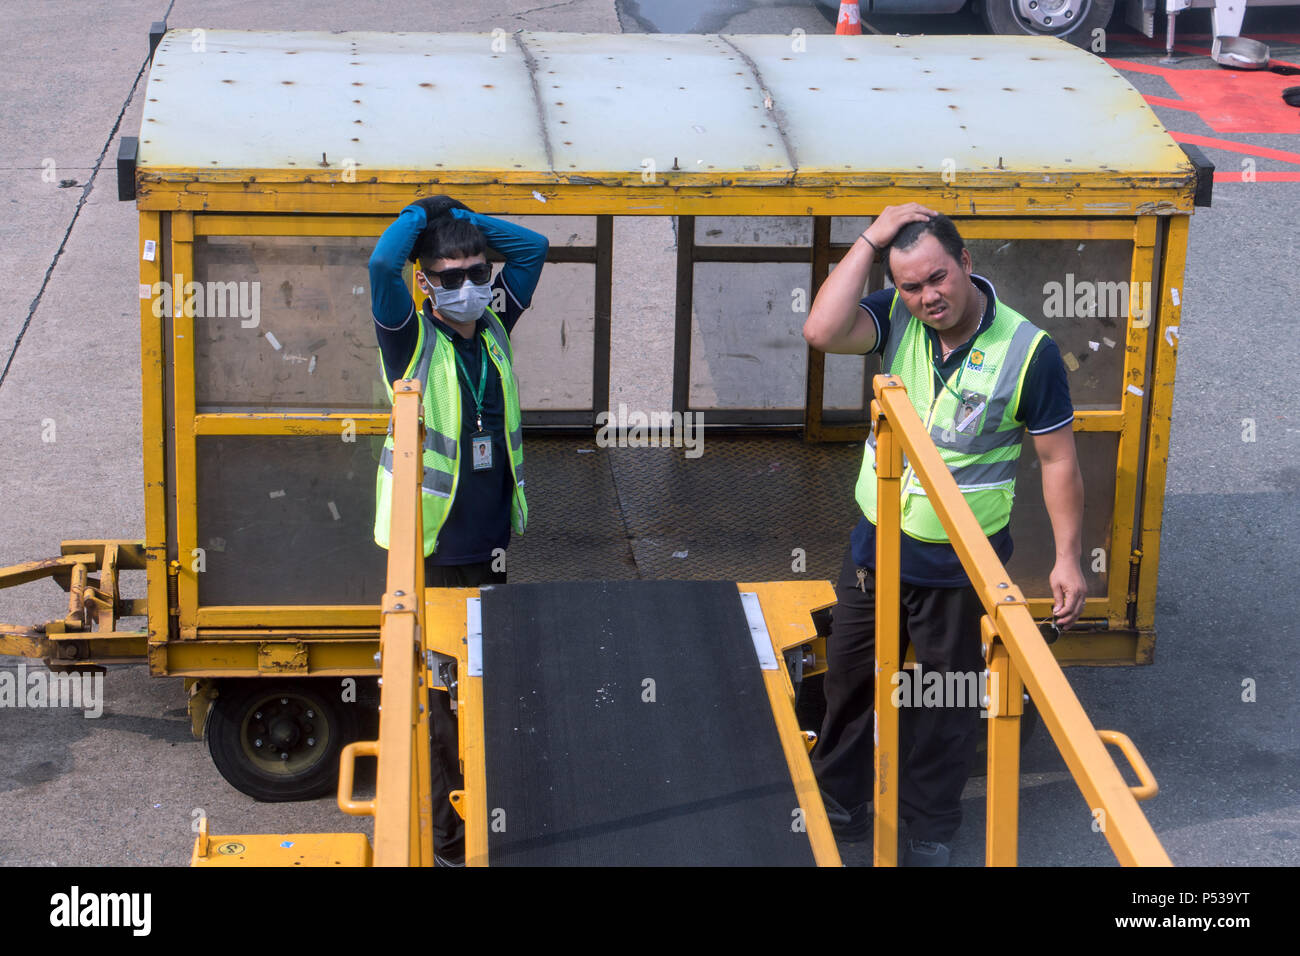 SAIGON, VIETNAM, DEC 13 2017, The men serve the conveyor belt and wait at the luggage going from the plane. Stock Photo